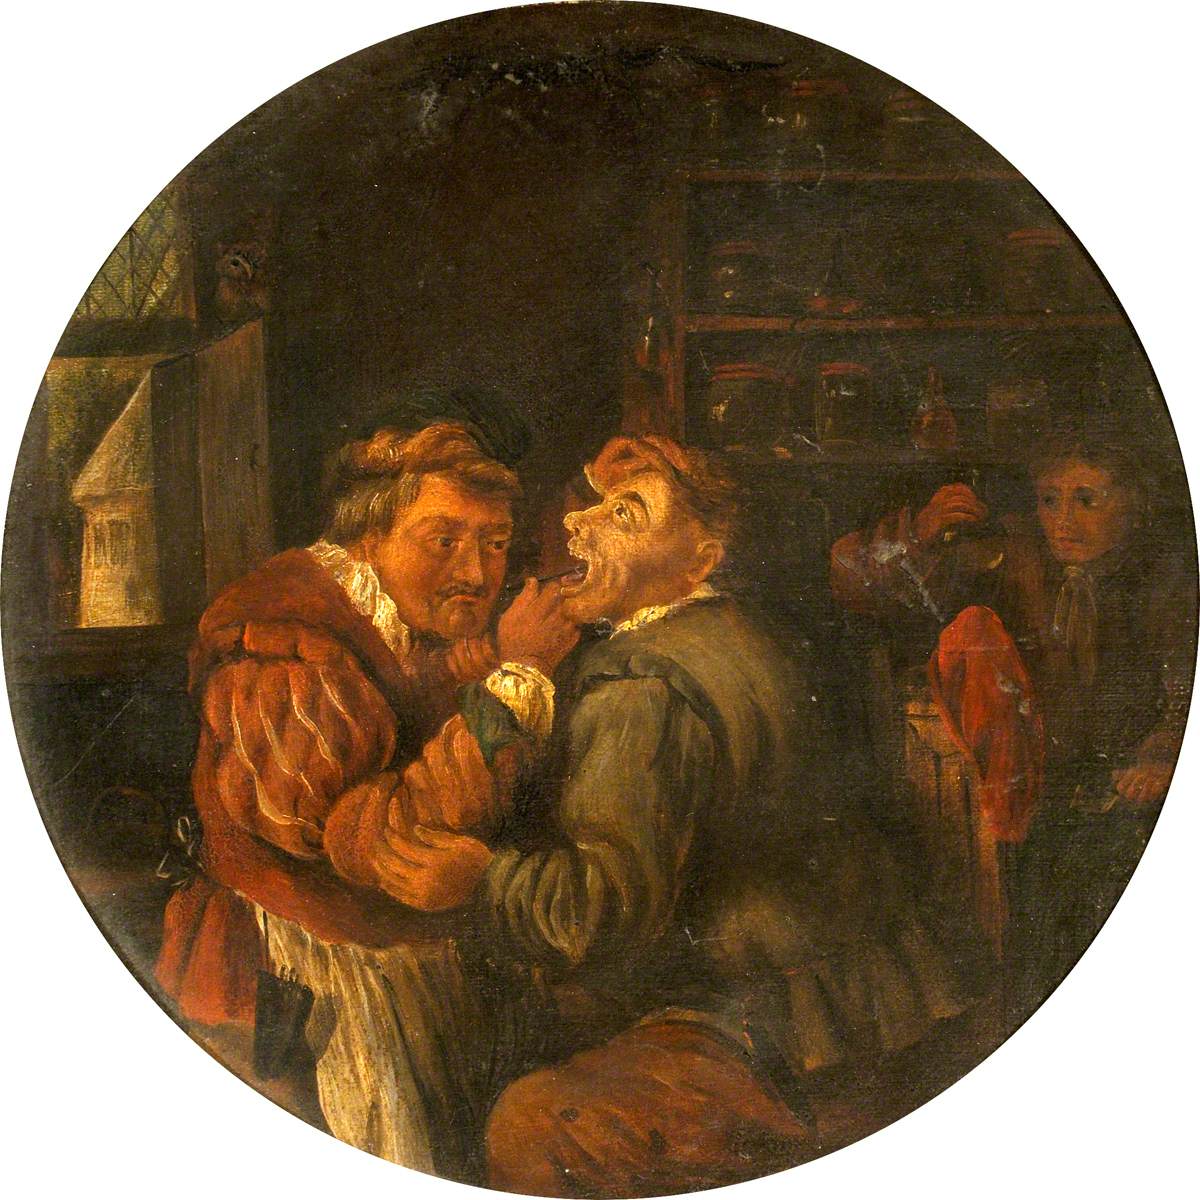 A Surgeon Attending to a Man's Tooth and a Man Examining a Urine Flask to the Right